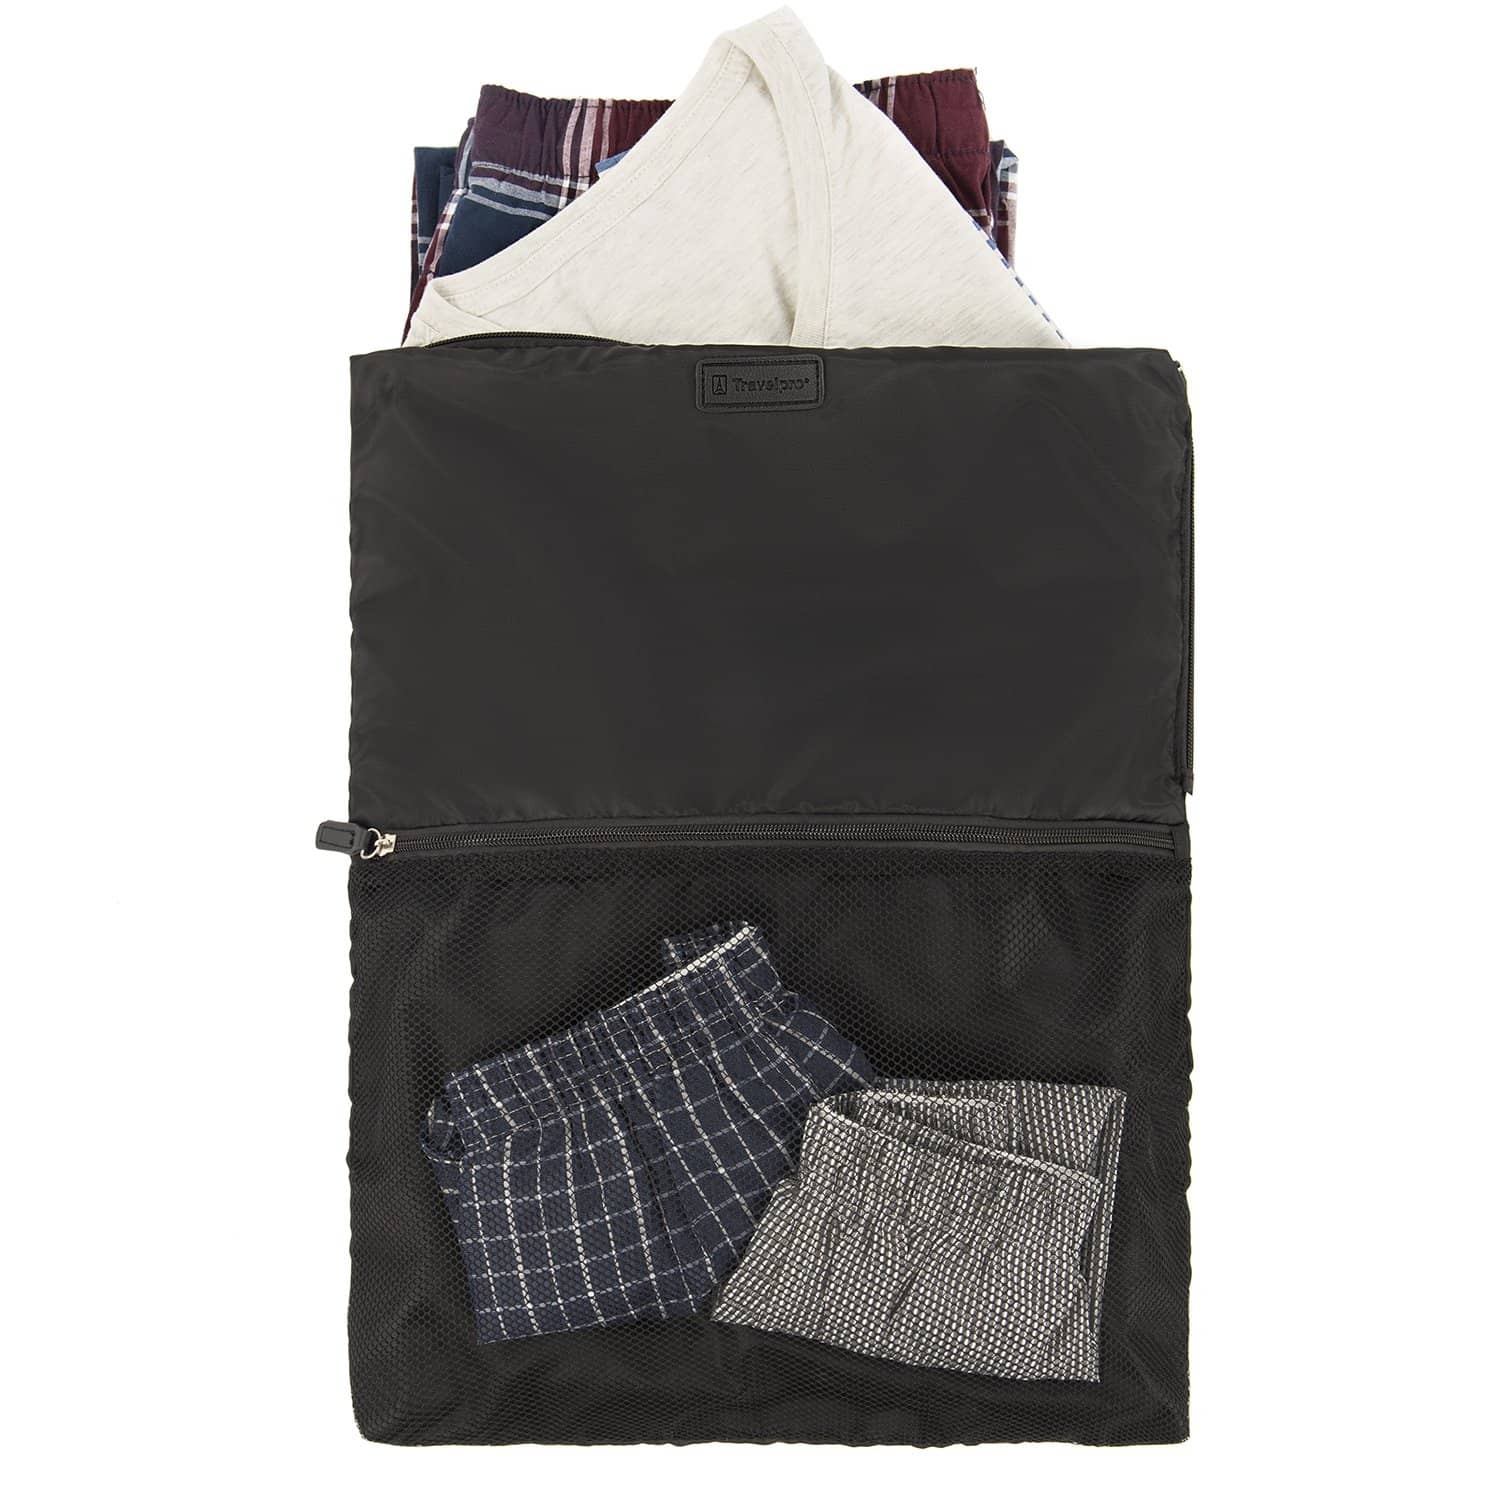 13 best travel laundry bags